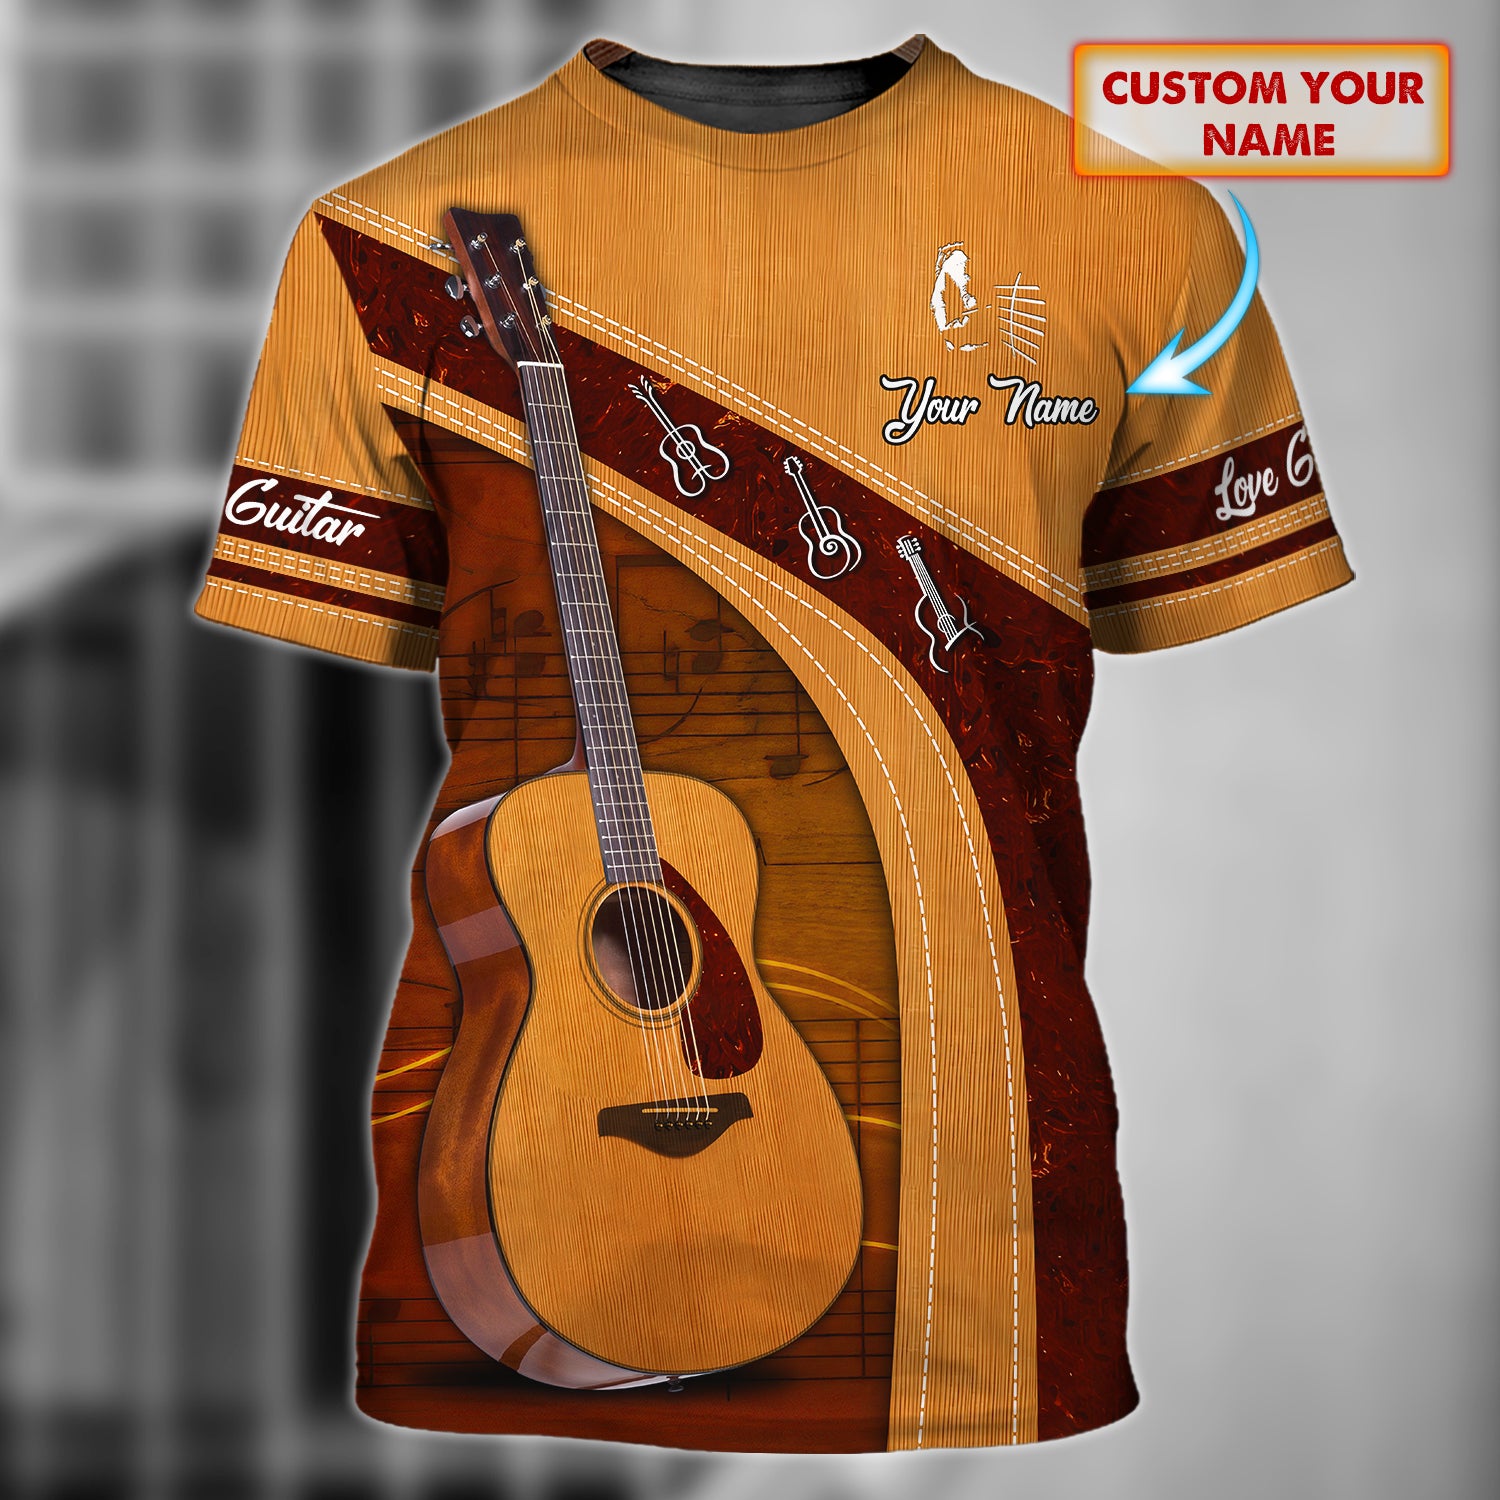 Love Guitar - Personalized Name 3D Tshirt 44 - Nvc97 - HKM